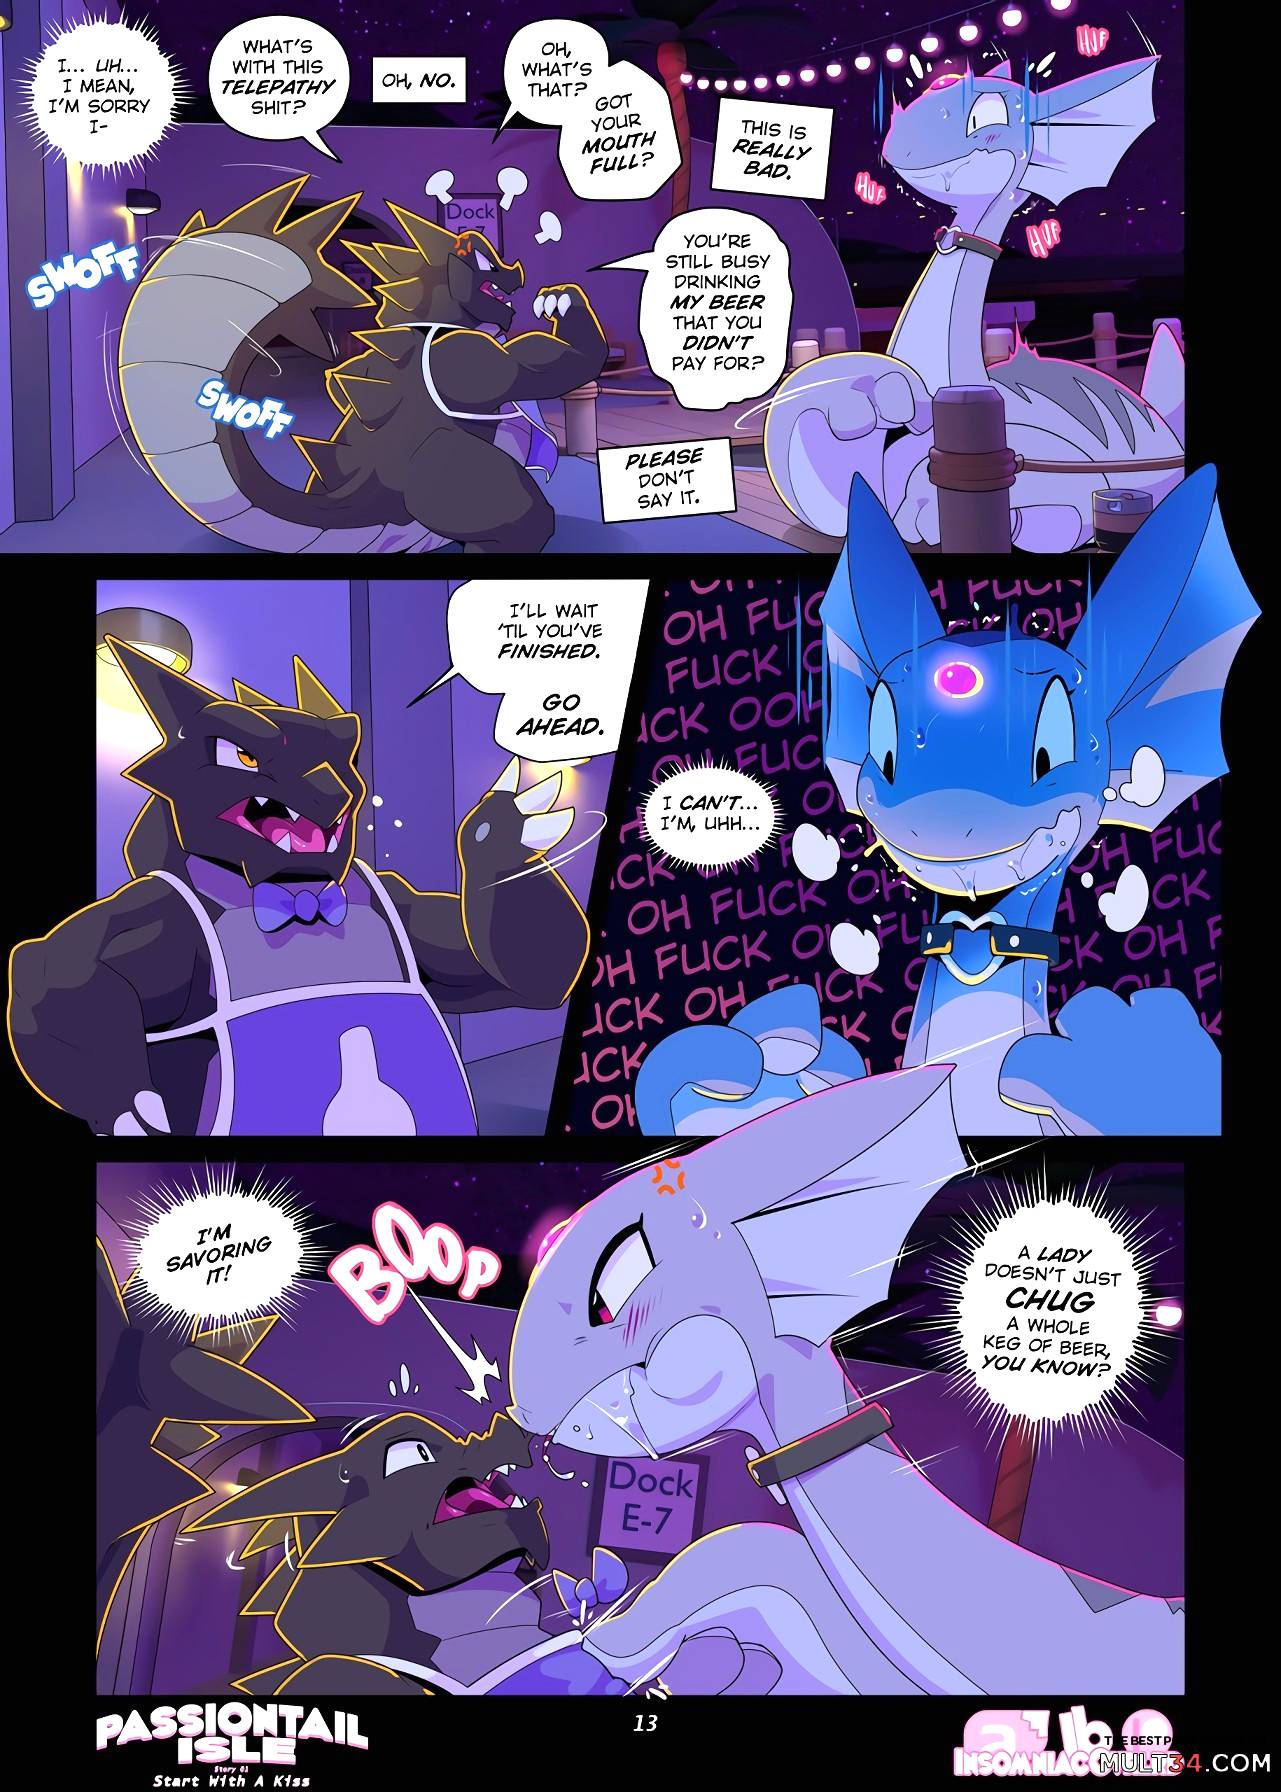 Passiontail Isle by Insomniacovrlrd page 14